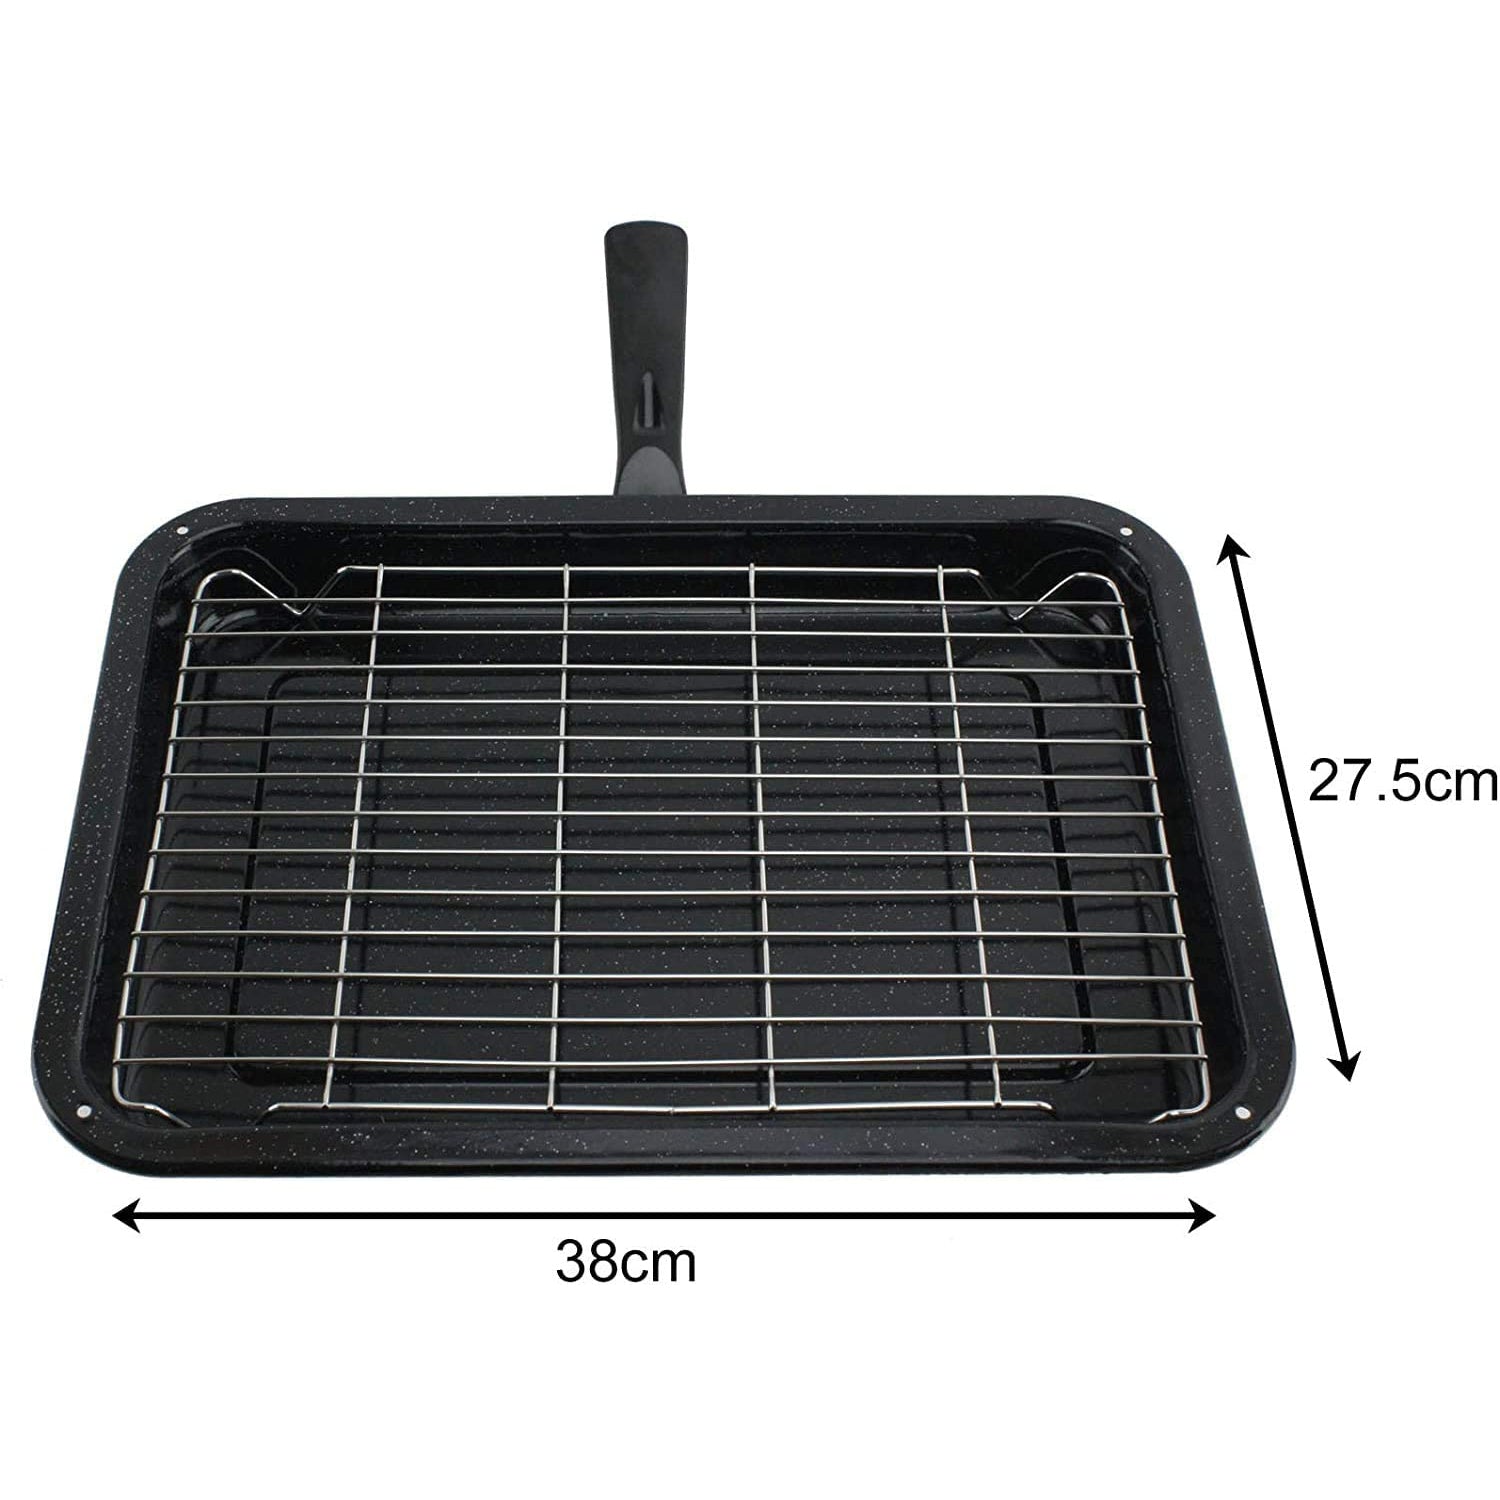 Small Grill Pan + Rack and Detachable Handle for TRICITY BENDIX Oven Cooker